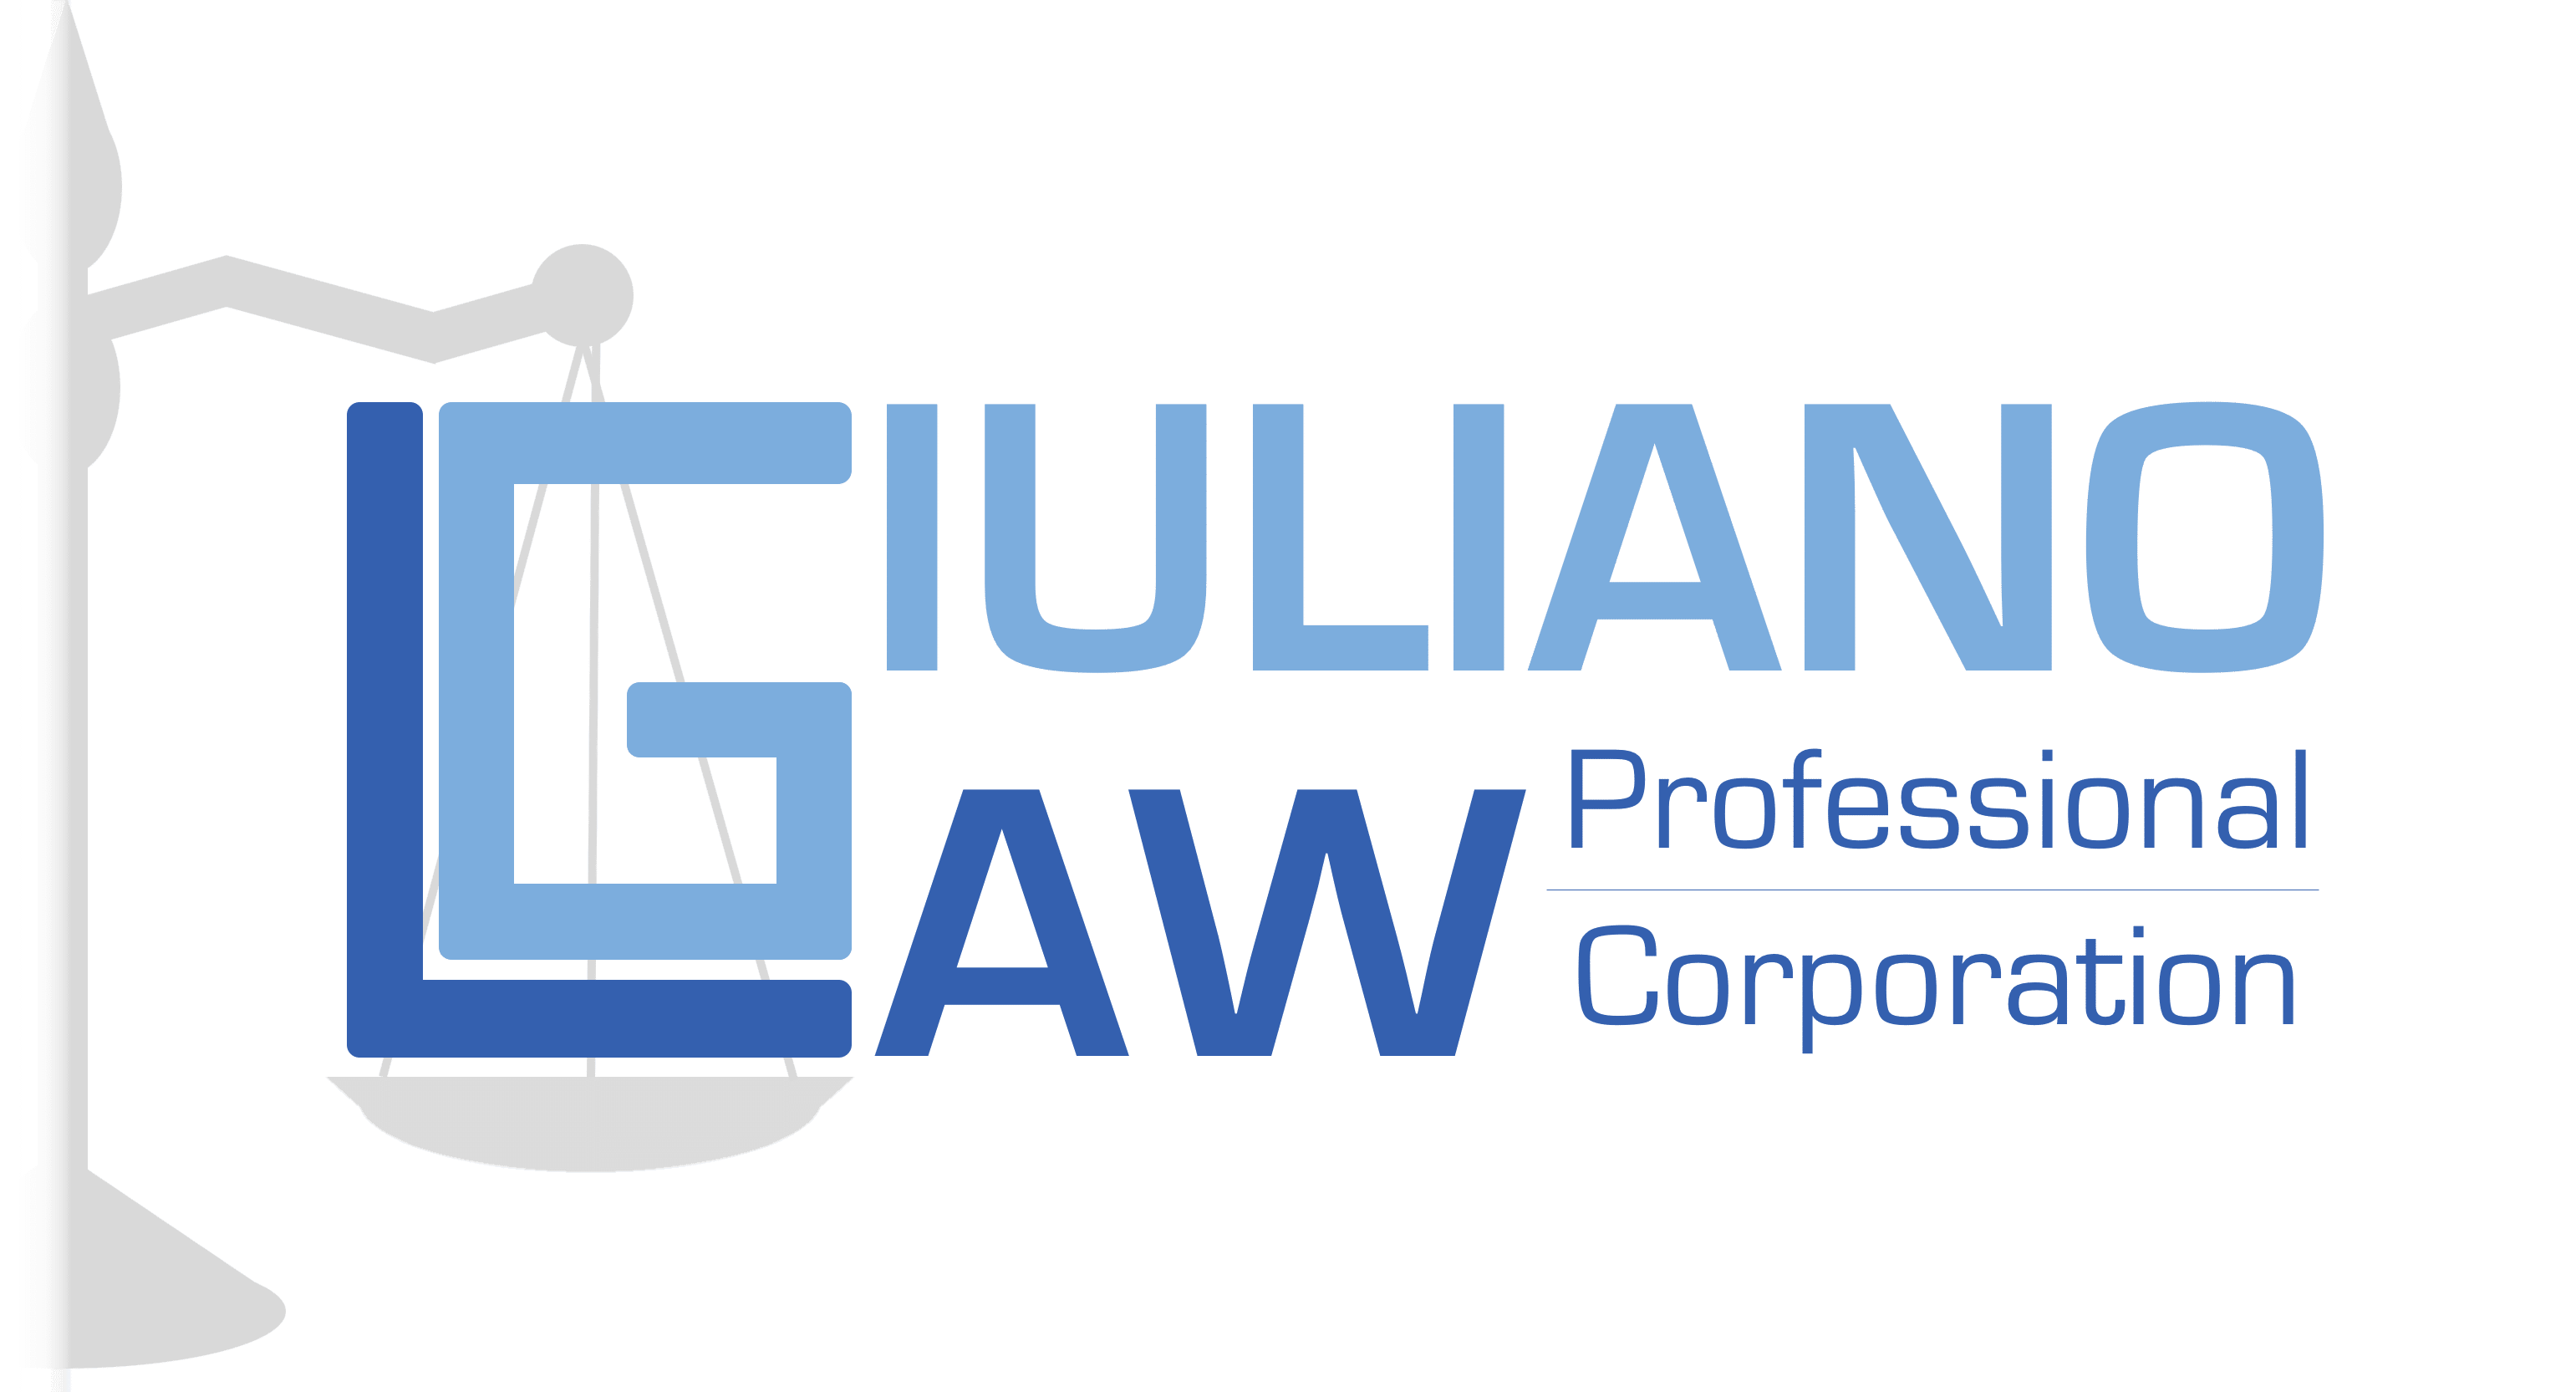 Giuliano Law PC Law Firm Bankruptcy & Merchant Cash Advance (MCA)